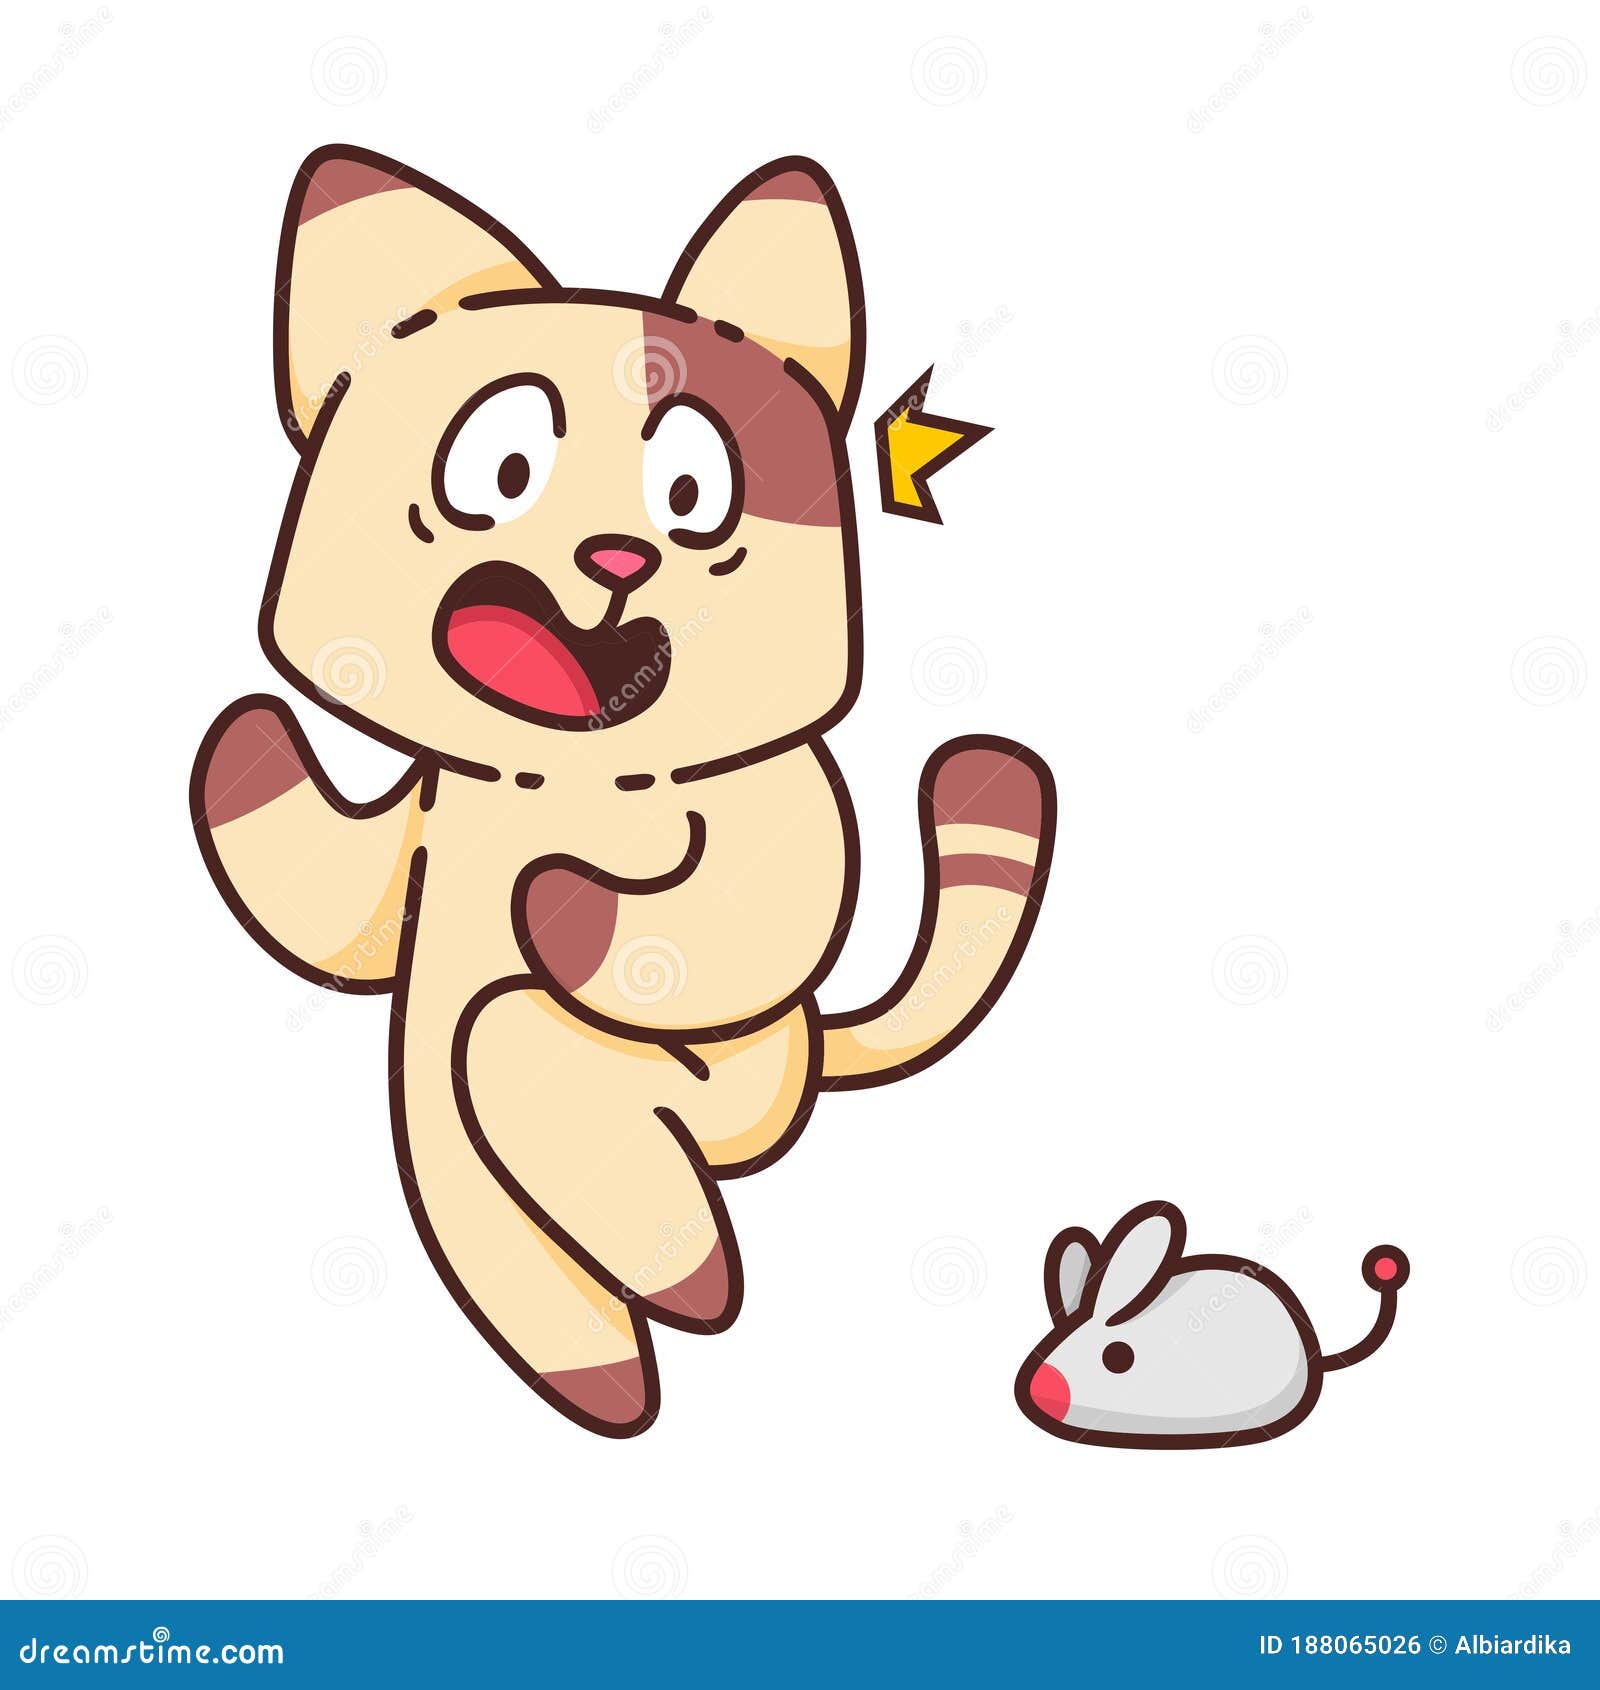 Cute Adorable Scary Brown Cat because Little Mouse Cartoon Doodle Vector Illustration Design Vector - Illustration adorable, brown: 188065026